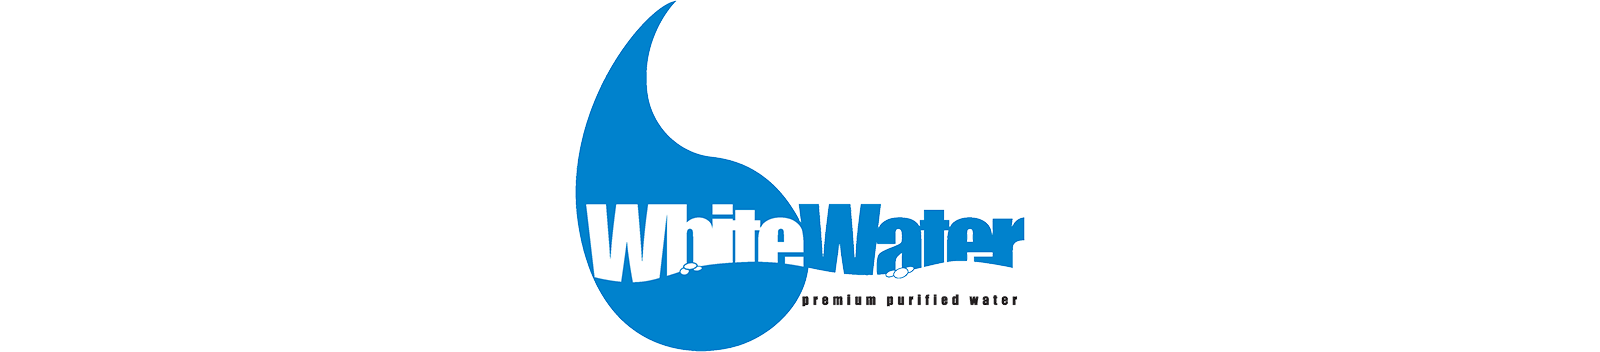 Water Brand Logo - White Water | Custom Water Bottle Labels & Water Delivery